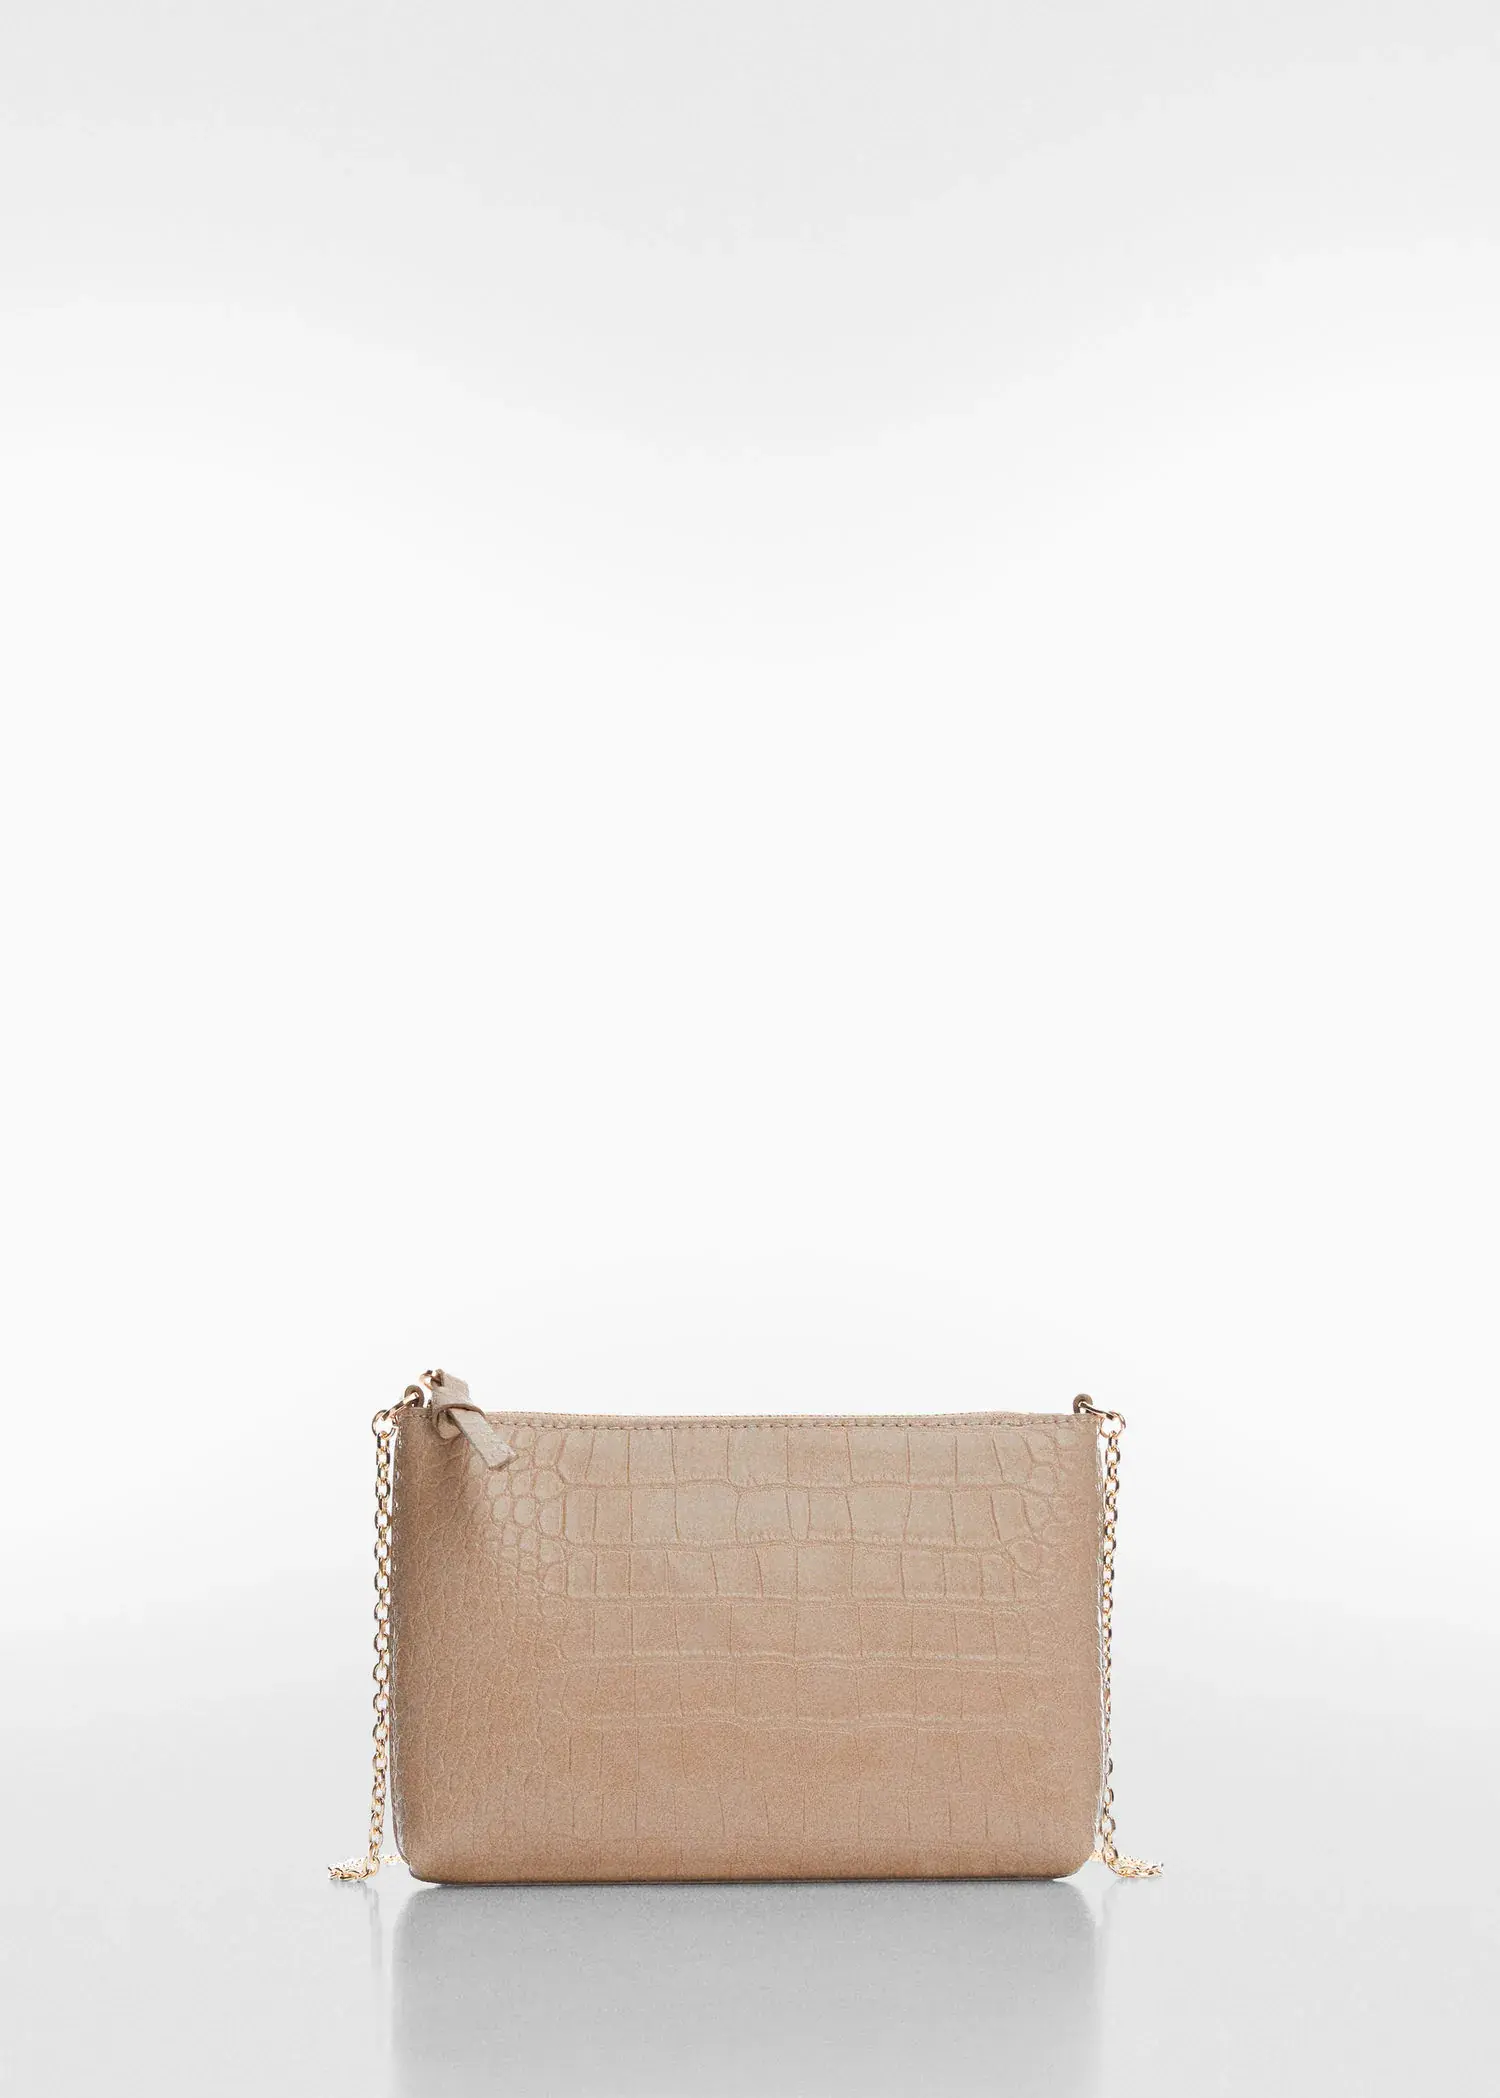 Mango Coco chain bag. a beige purse is shown on a white background. 